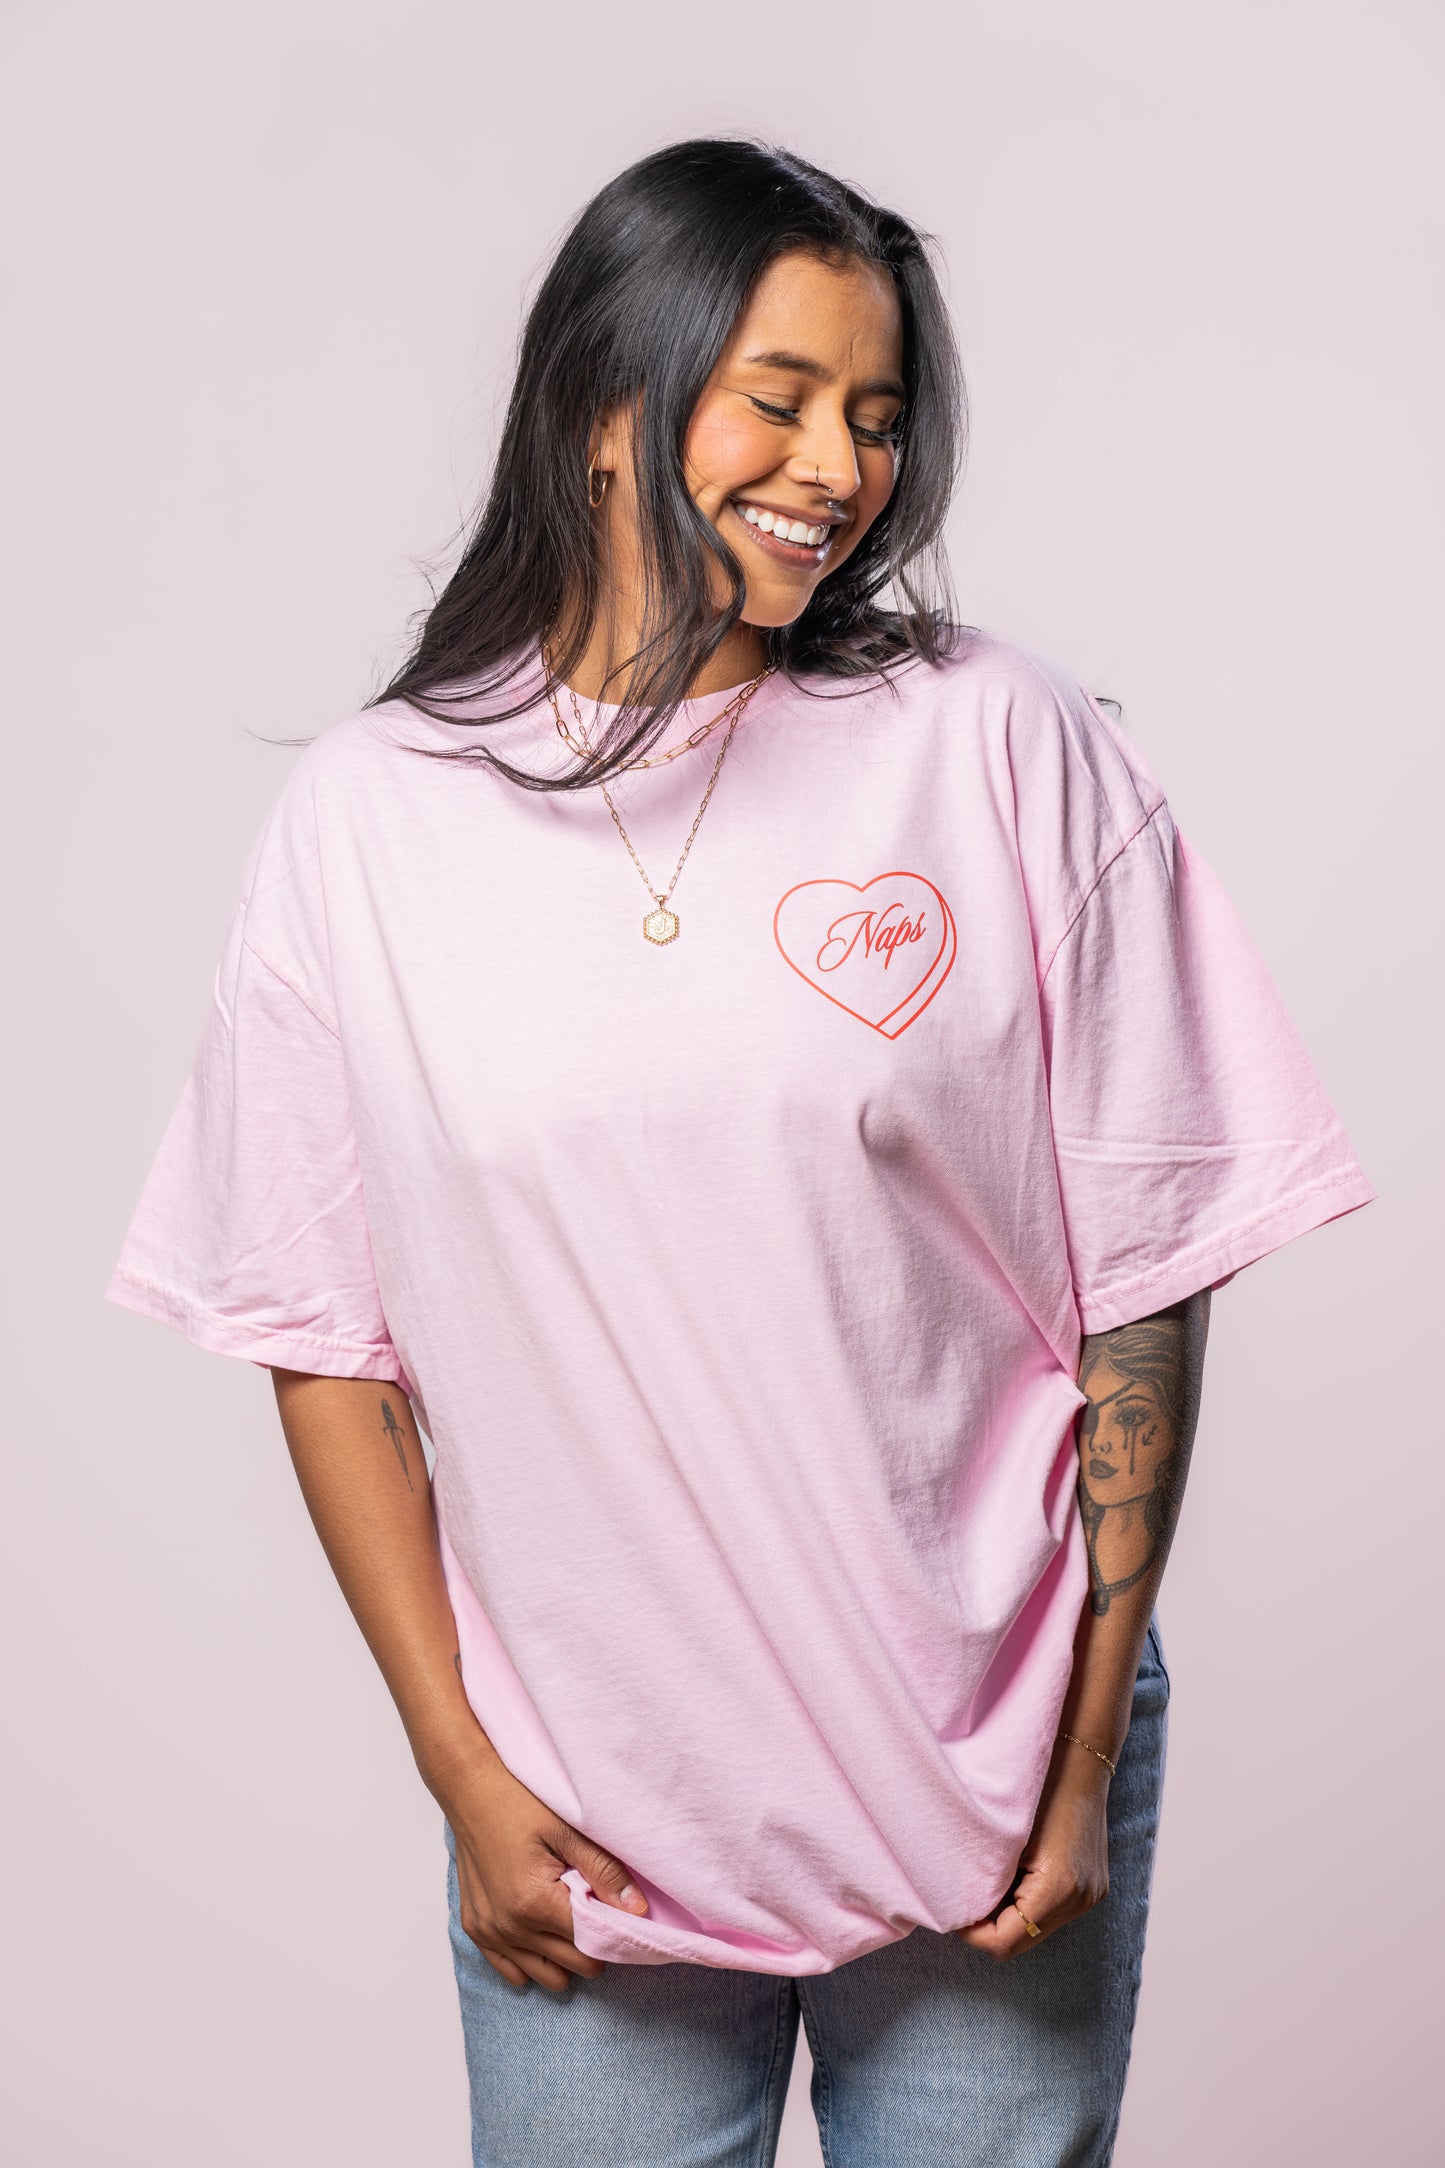 Naps Lover - Tee (Pale Pink)